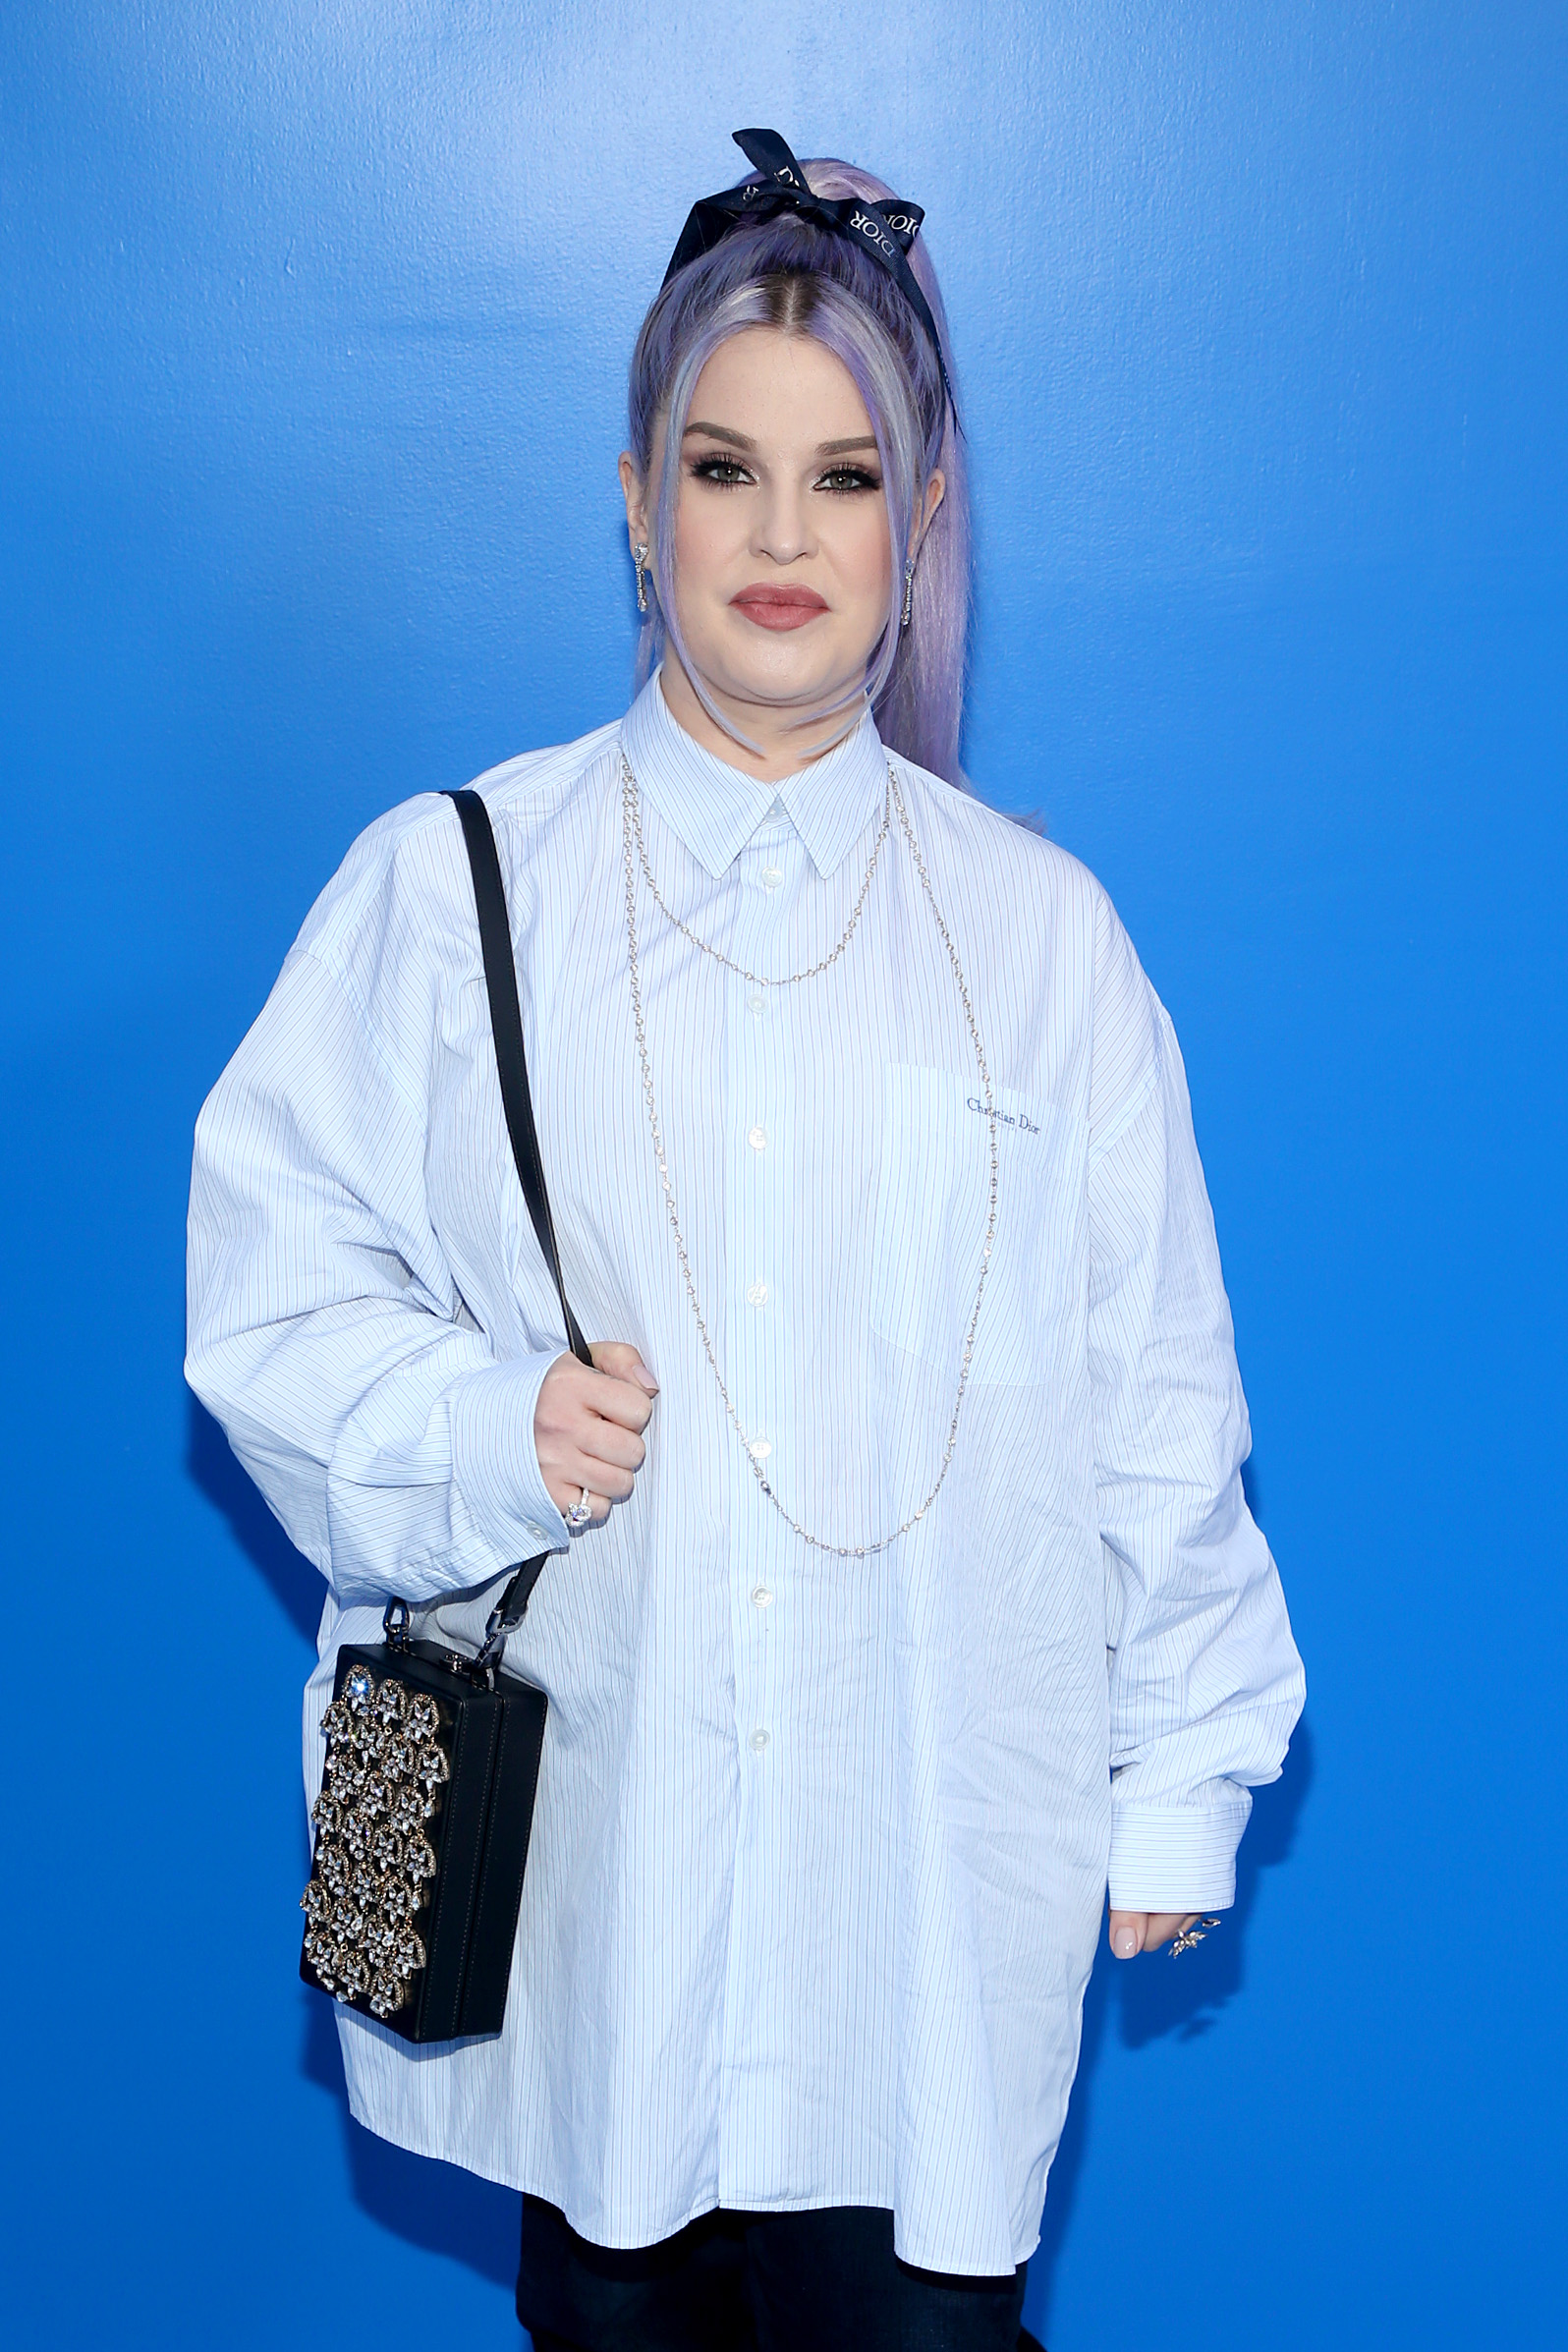 Kelly Osbourne during the Dior Men's Spring/Summer 2023 Collection on May 19, 2022 in Los Angeles, California | Source: Getty Images